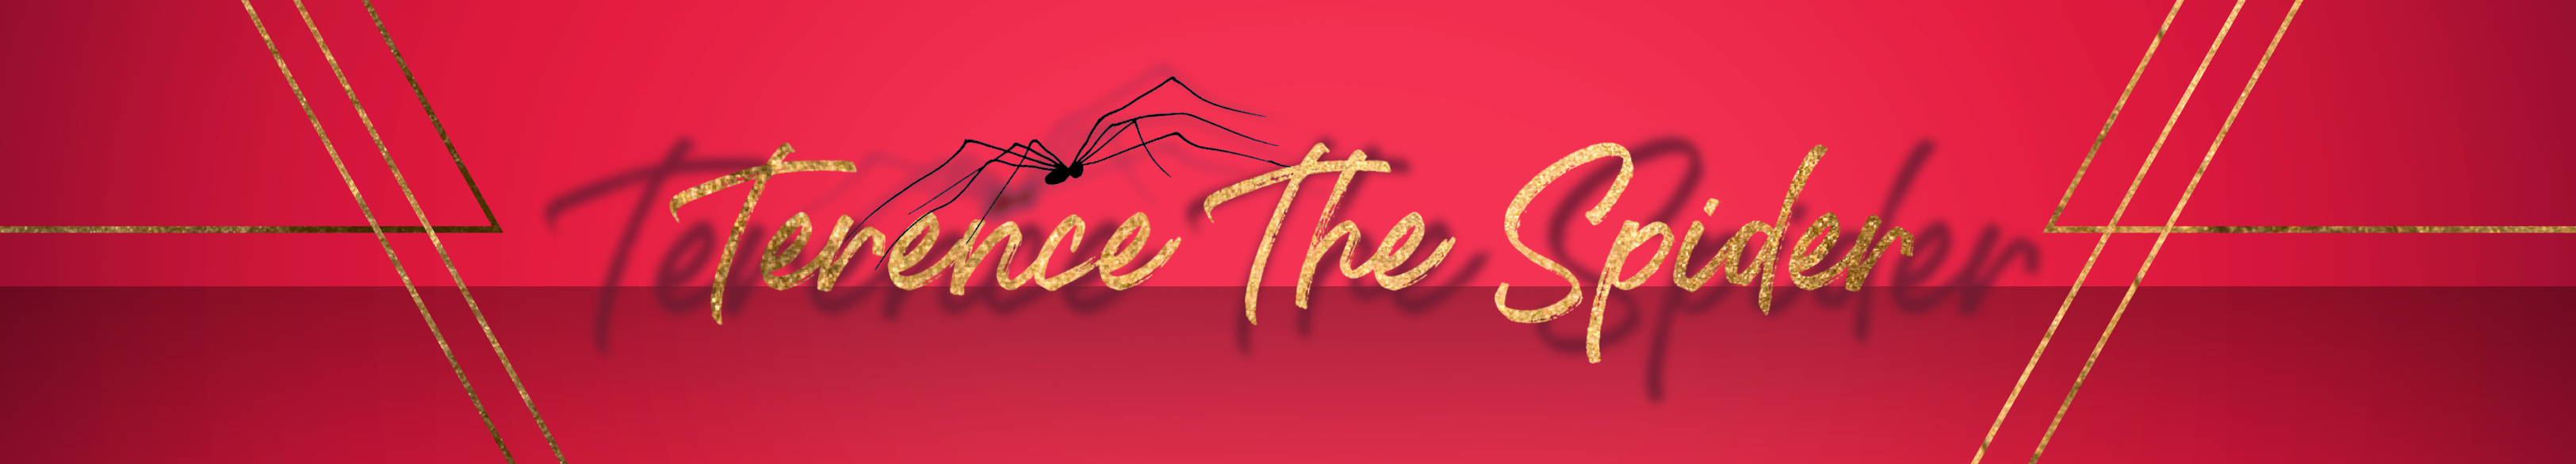 TerenceTheSpider banner